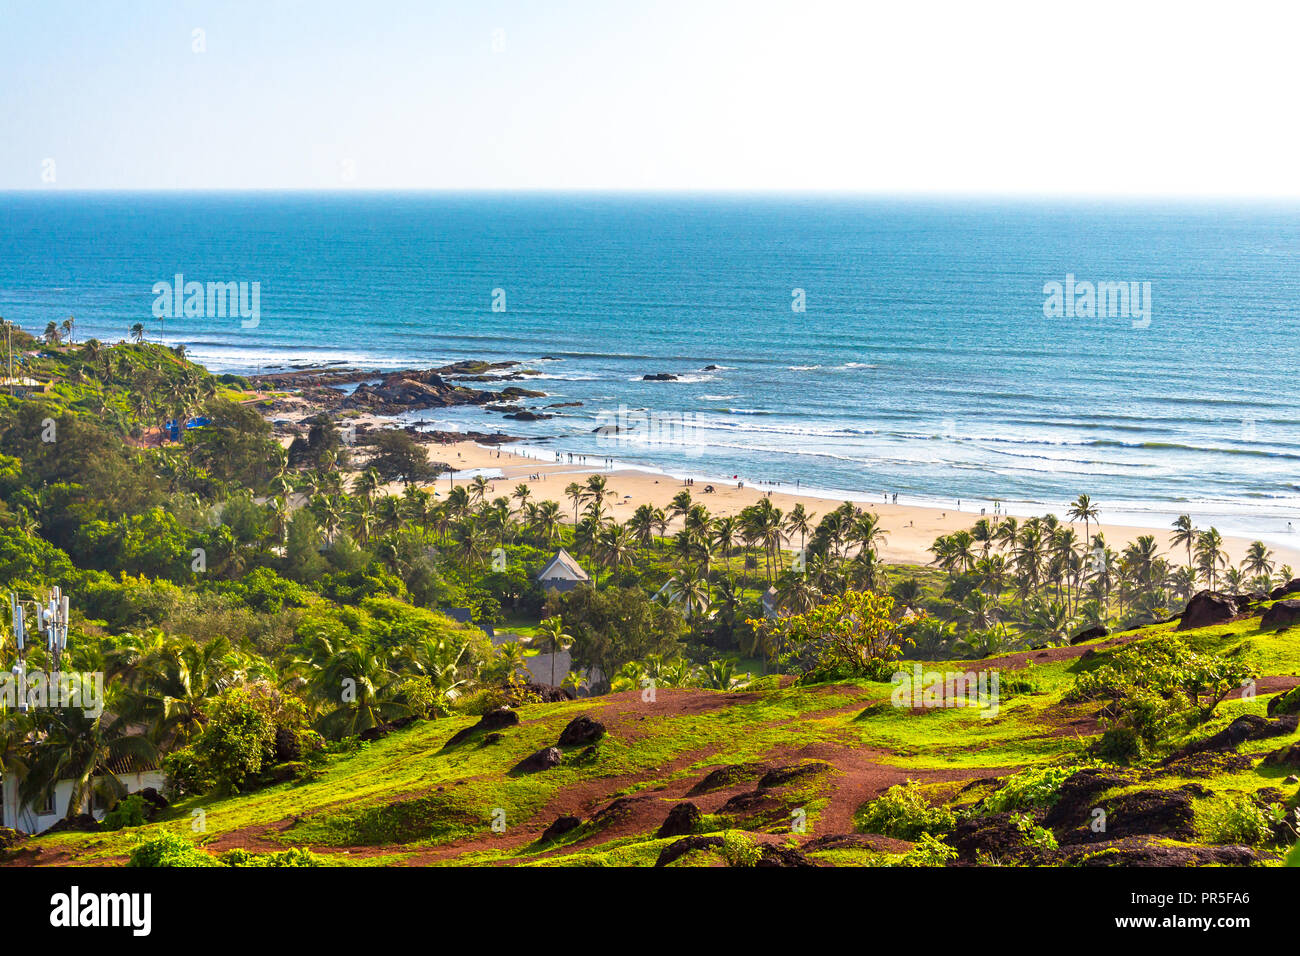 Green views of Vagator beach from the top of Chapora Fort, Goa, India, Asia. Vagator Beach is one of the most beautiful beaches in north Goa. Stock Photo